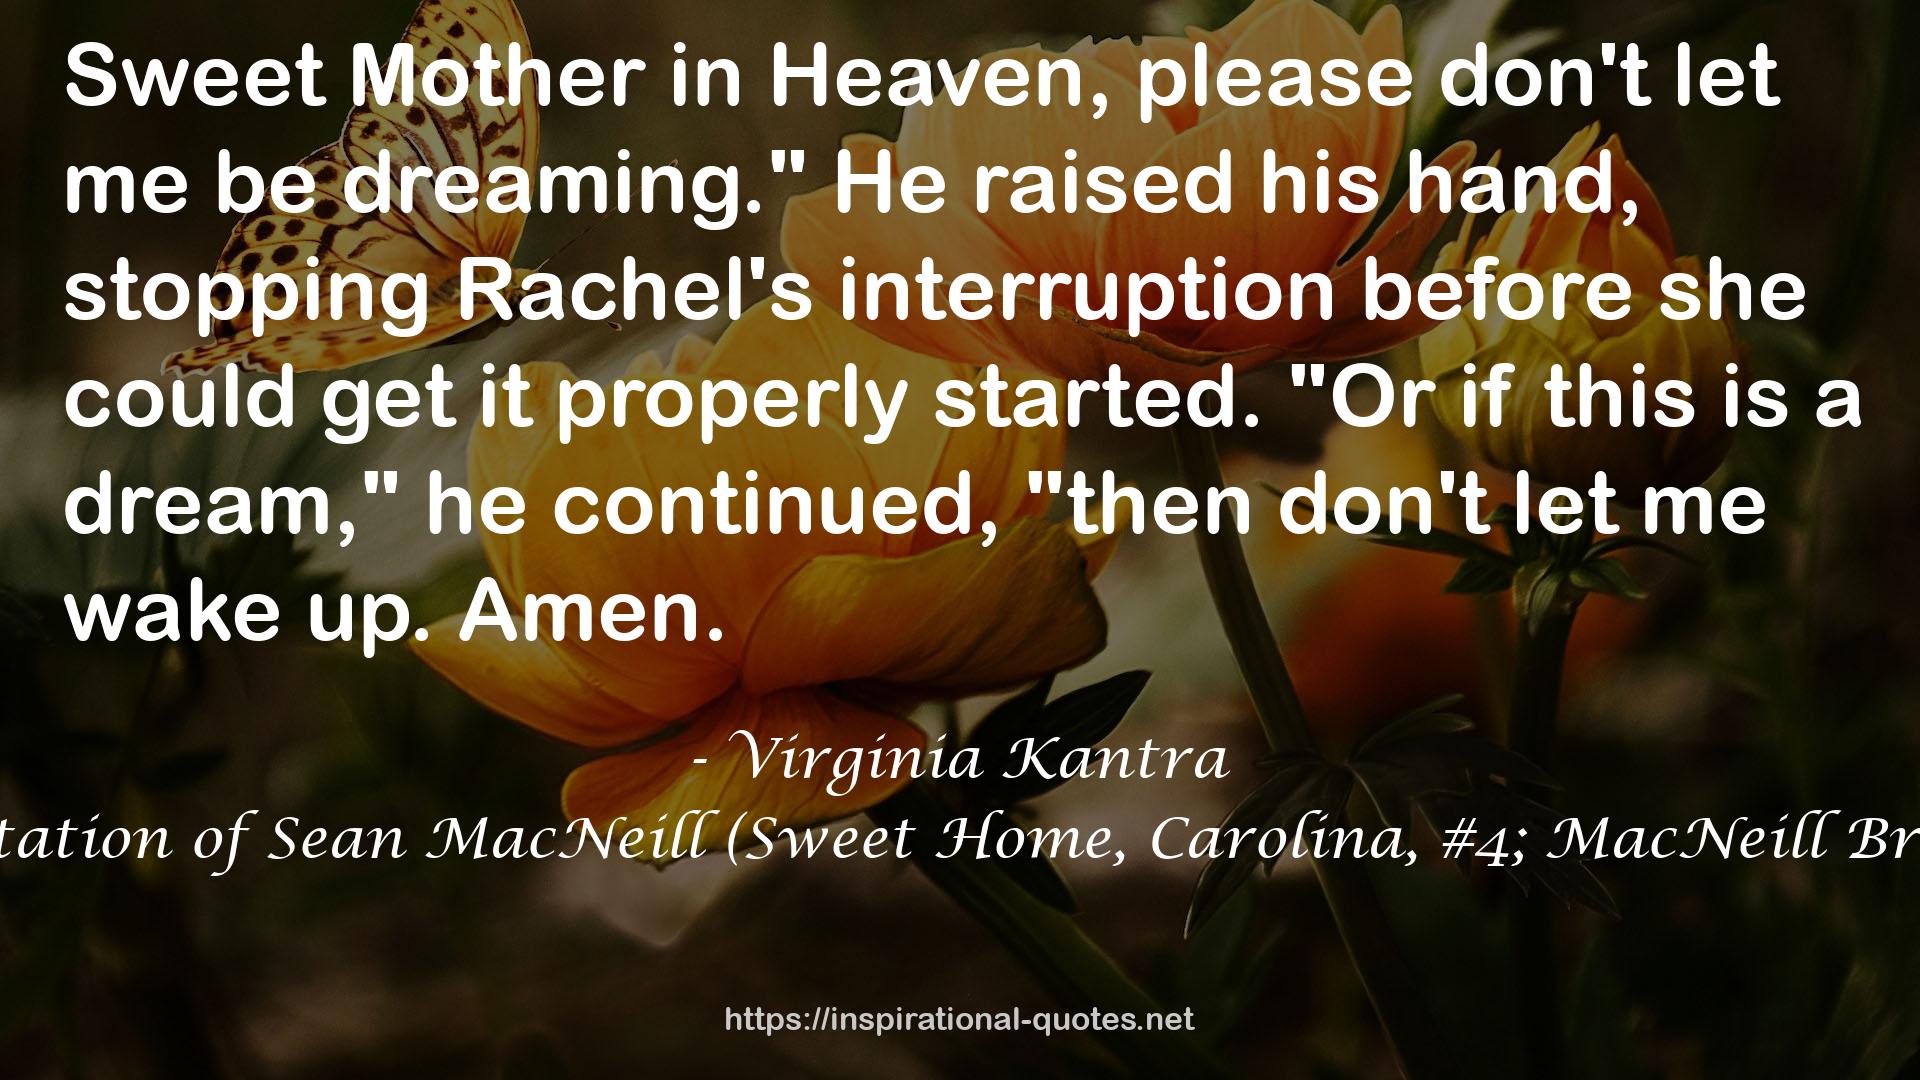 The Temptation of Sean MacNeill (Sweet Home, Carolina, #4; MacNeill Brothers, #3) QUOTES